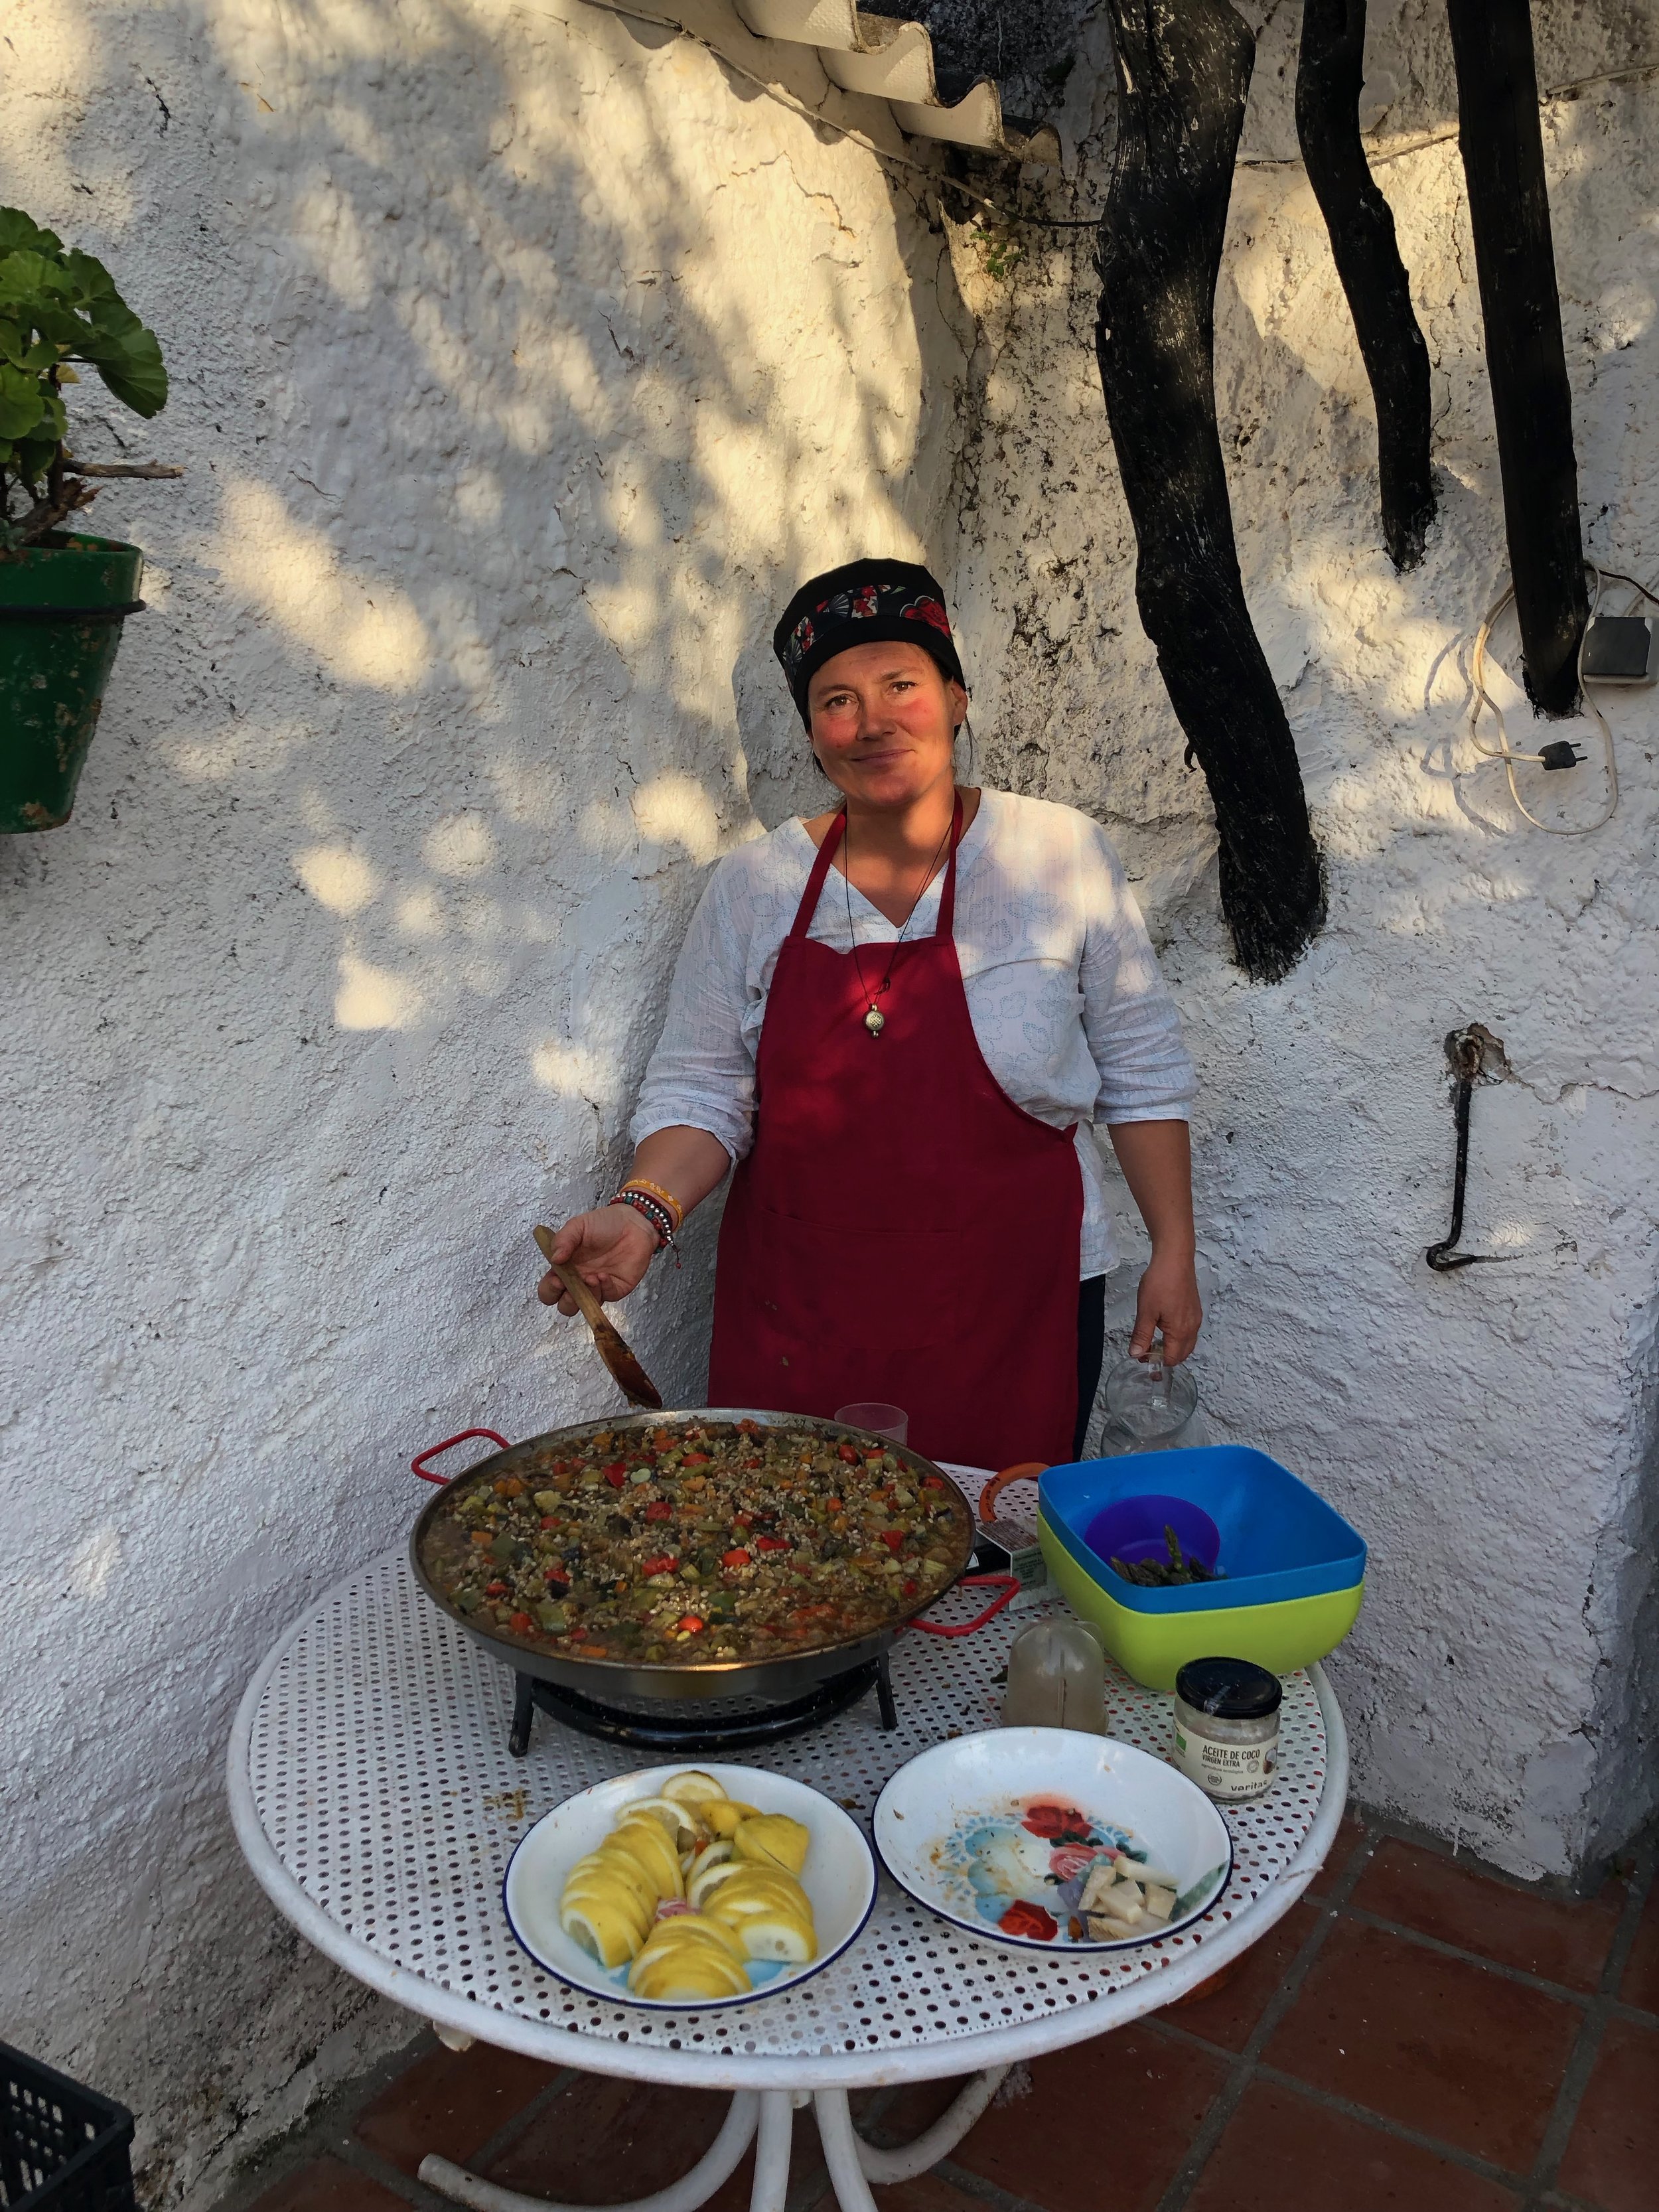 Tiziana with her vegan paella at Yin Yang Yoga retreat in the Malaga mountains in Spain with Jane Bakx Yoga (Copy) (Copy)